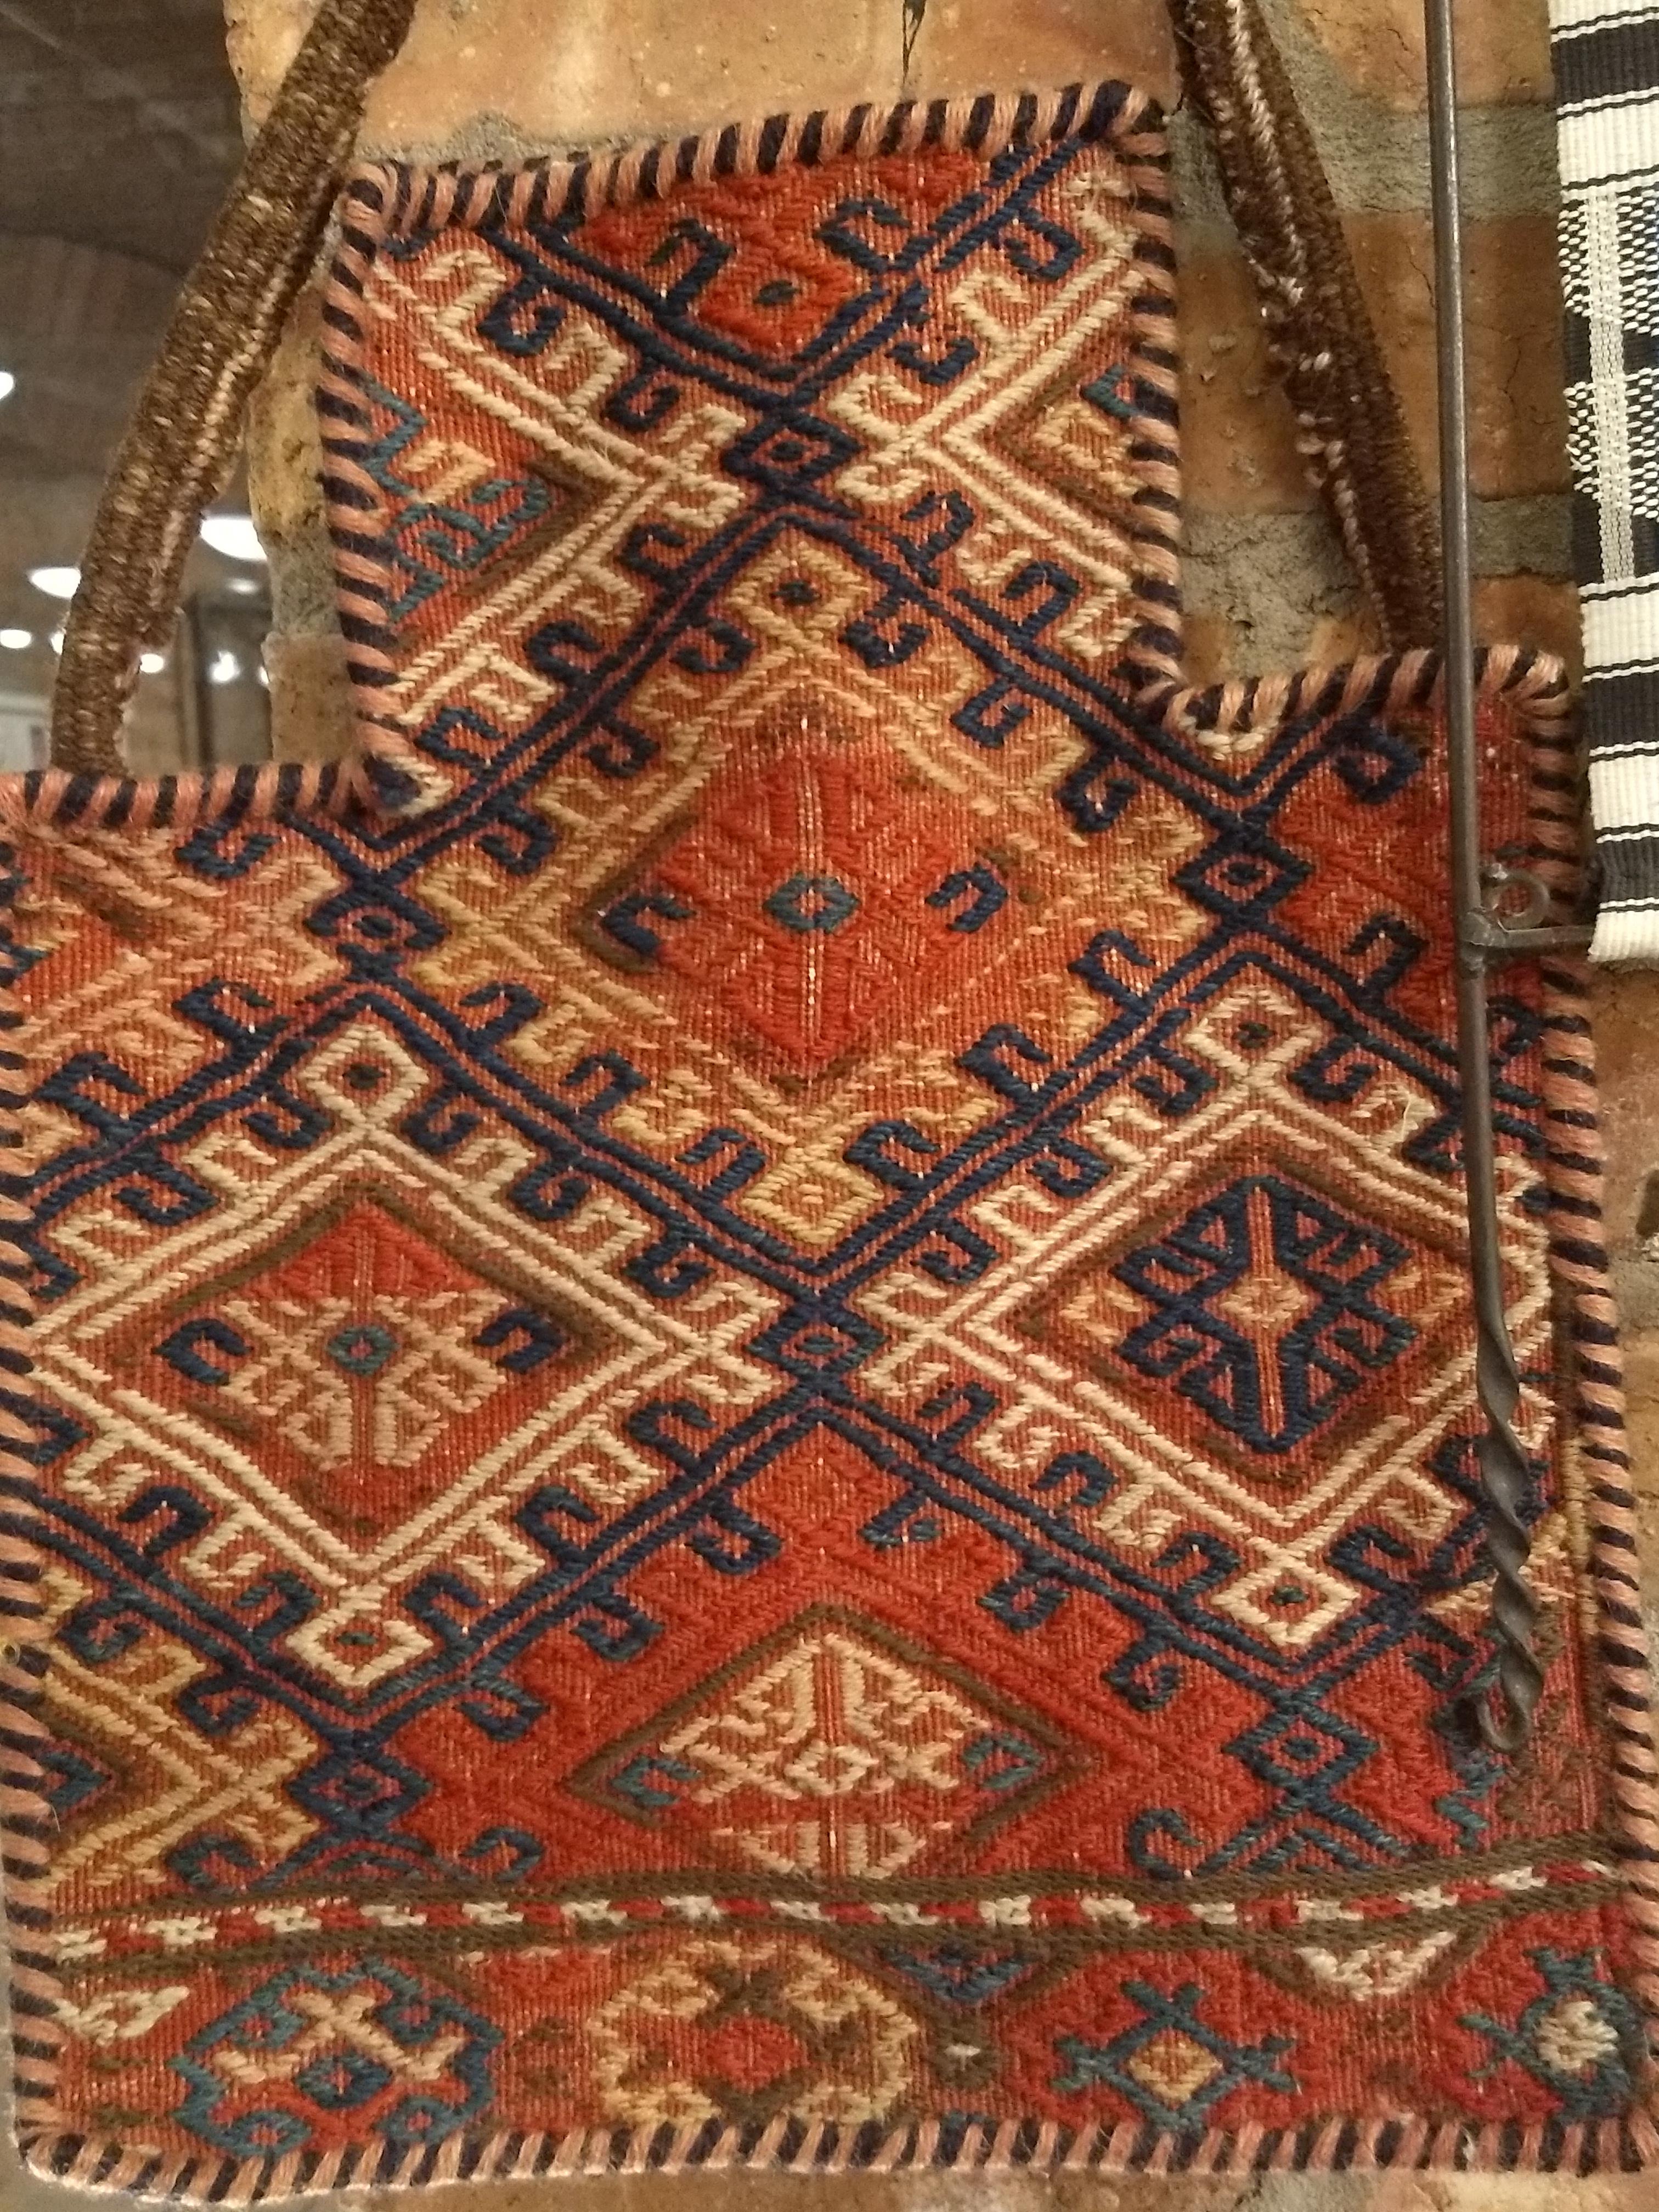 A vintage Baluch tribal salt bag with geometric pattern in red, blue and brown colors.  A tribal salt bag for preserving and transporting salt during migration. 
For the tribal people salt has always been one of the most important and precious